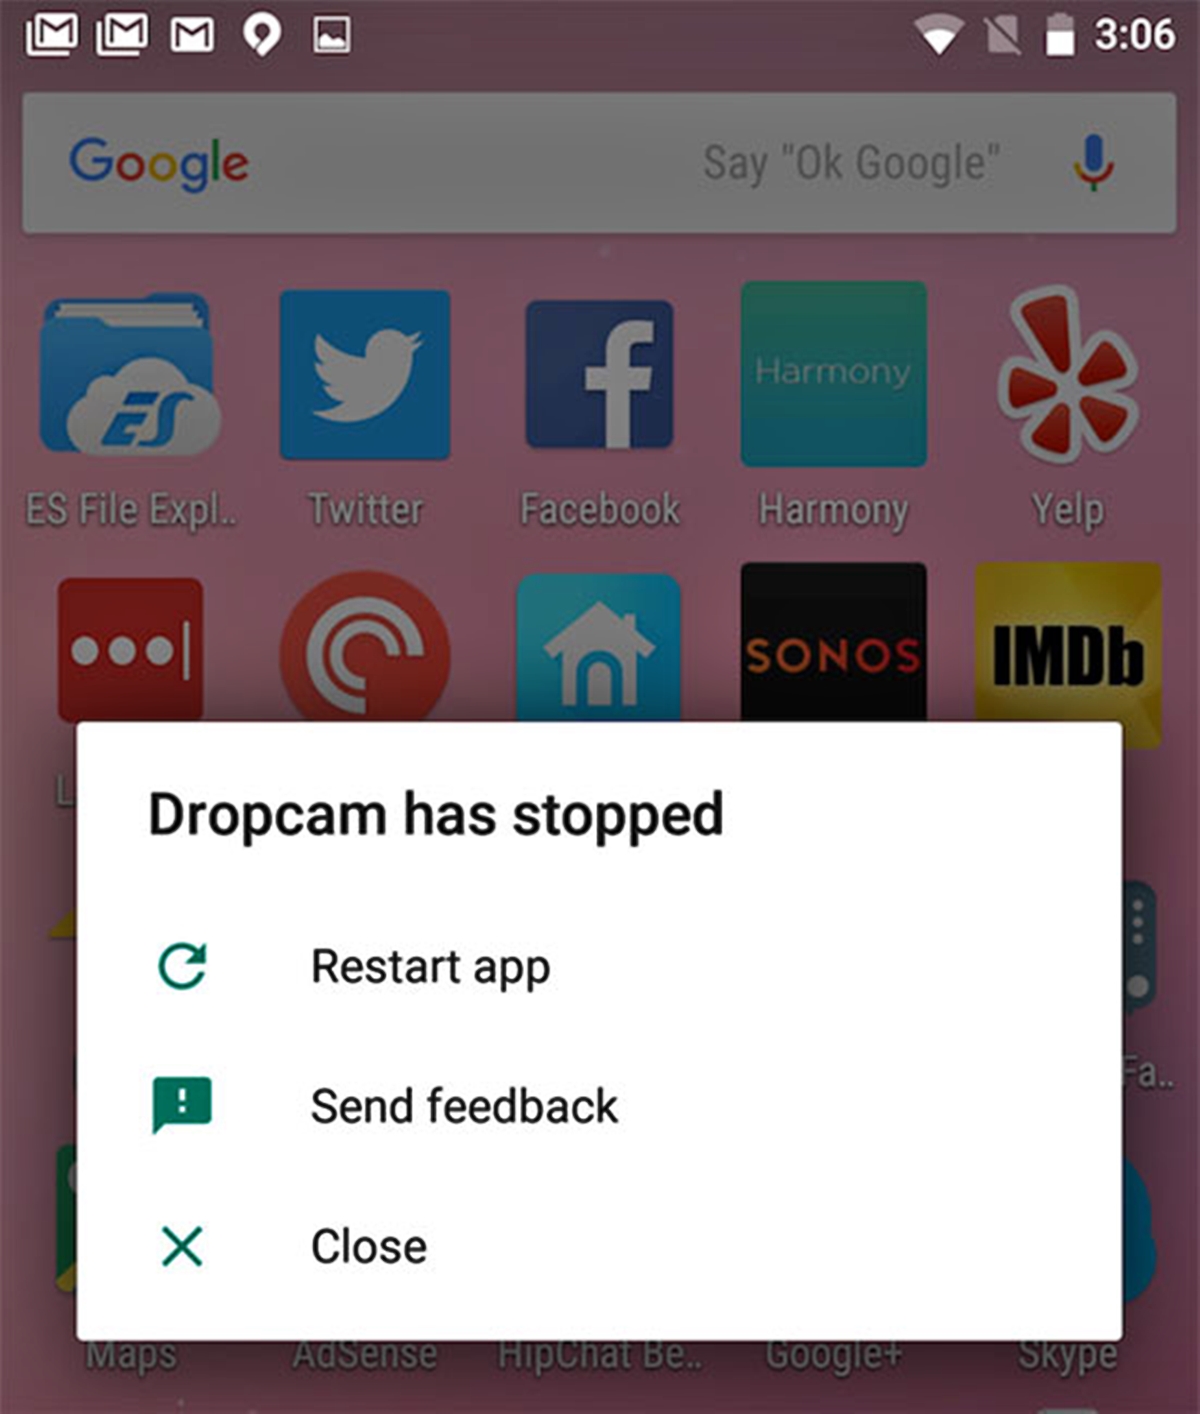 google-app-crashing-on-your-android-phone-how-to-fix-working-methods